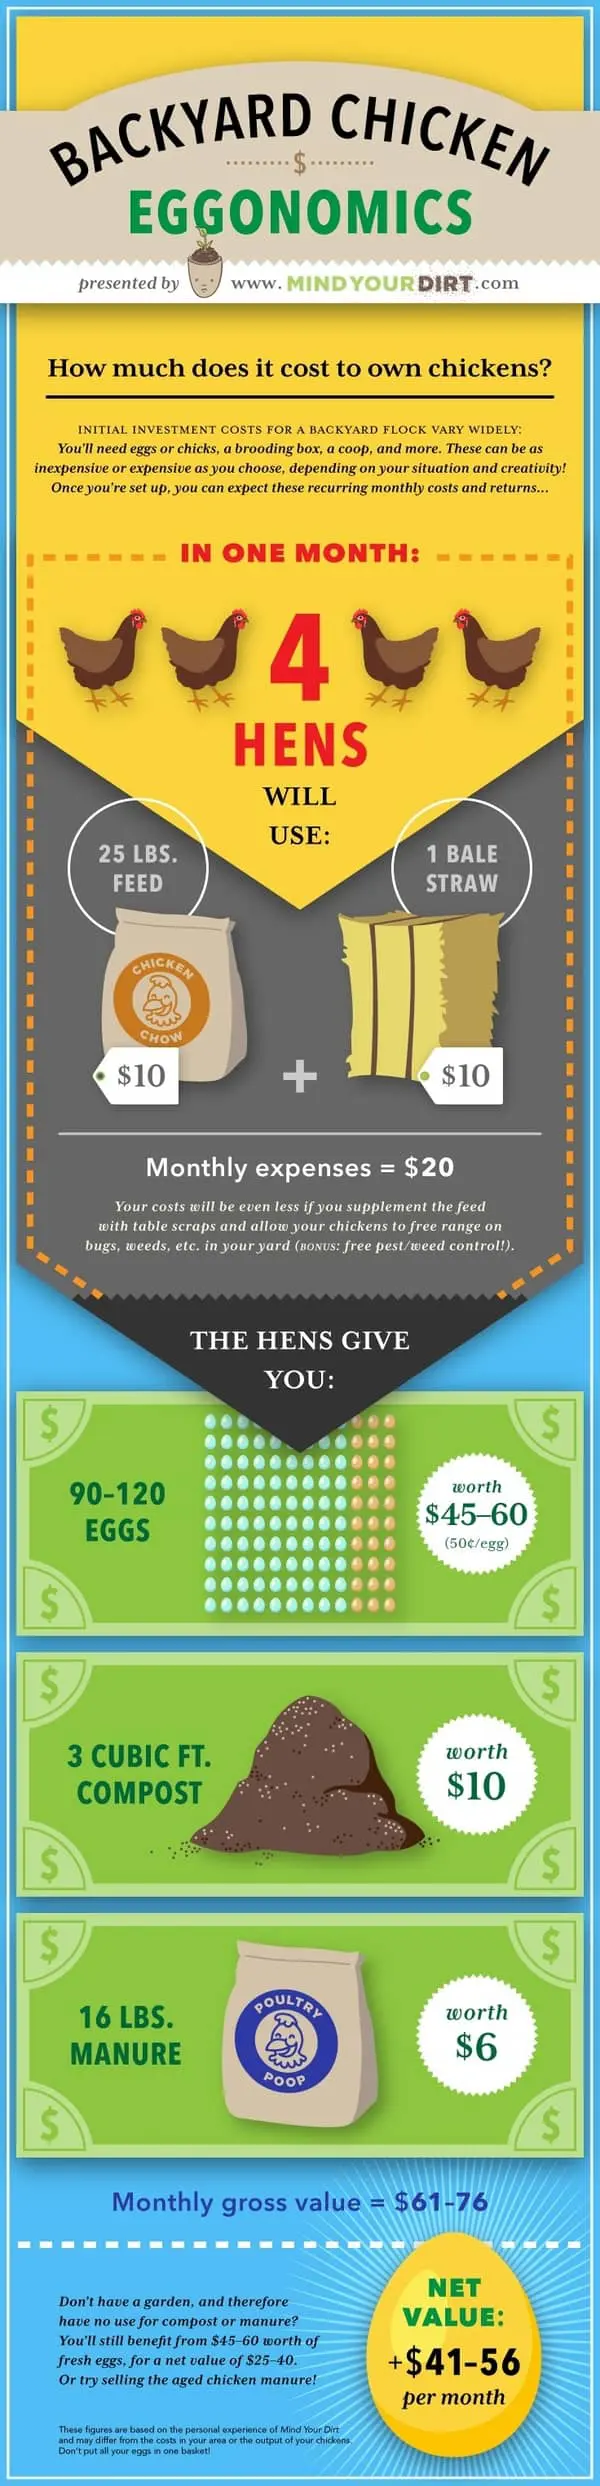 Backyard Chicken Eggonomics: How Much Does it Really Cost to Raise Chickens? - Lean in detail how much it may cost to raise chickens from chicks to full grown chickens that lay eggs. From the initial investment costs to potential return on investment. Infographic by mindyourdirt.com